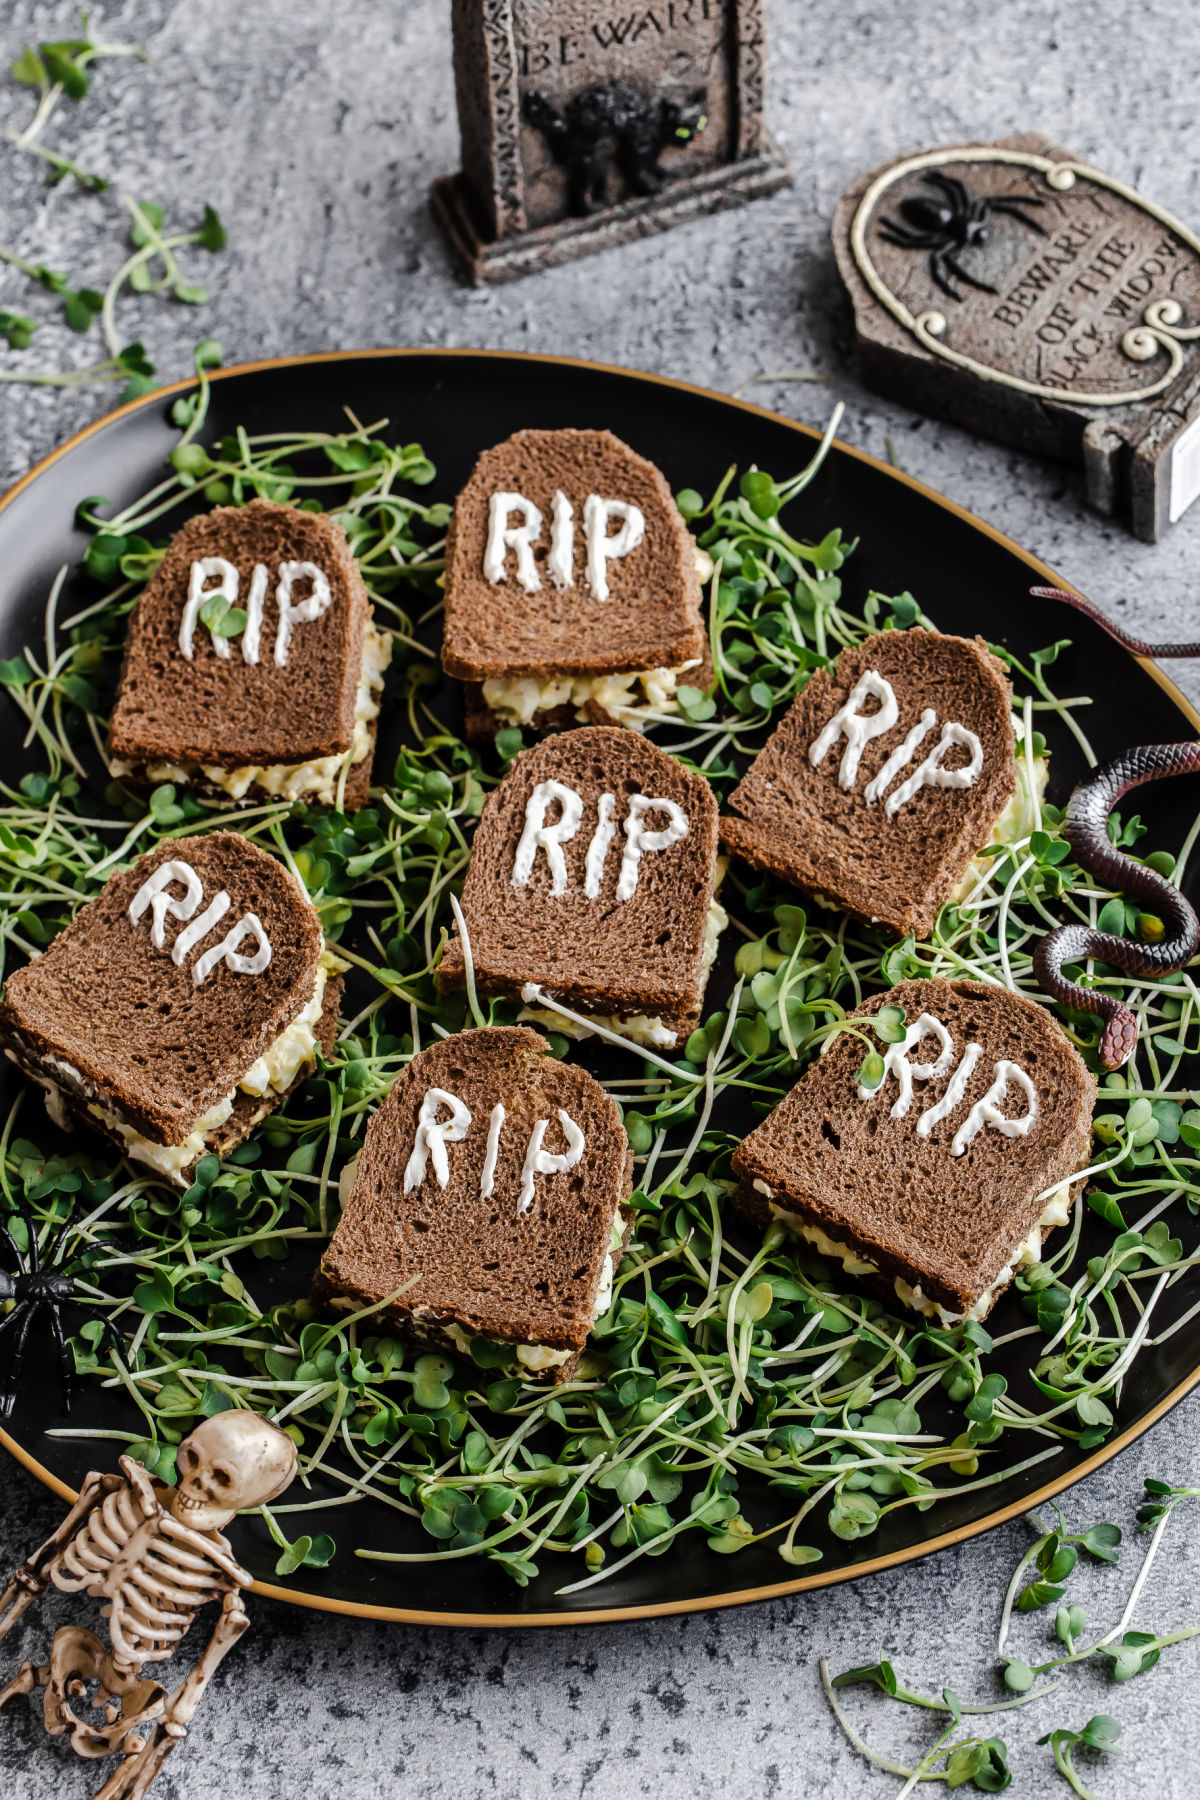 small sandwiches cut to look like Halloween tombstones, laying on a bed of microgreens.